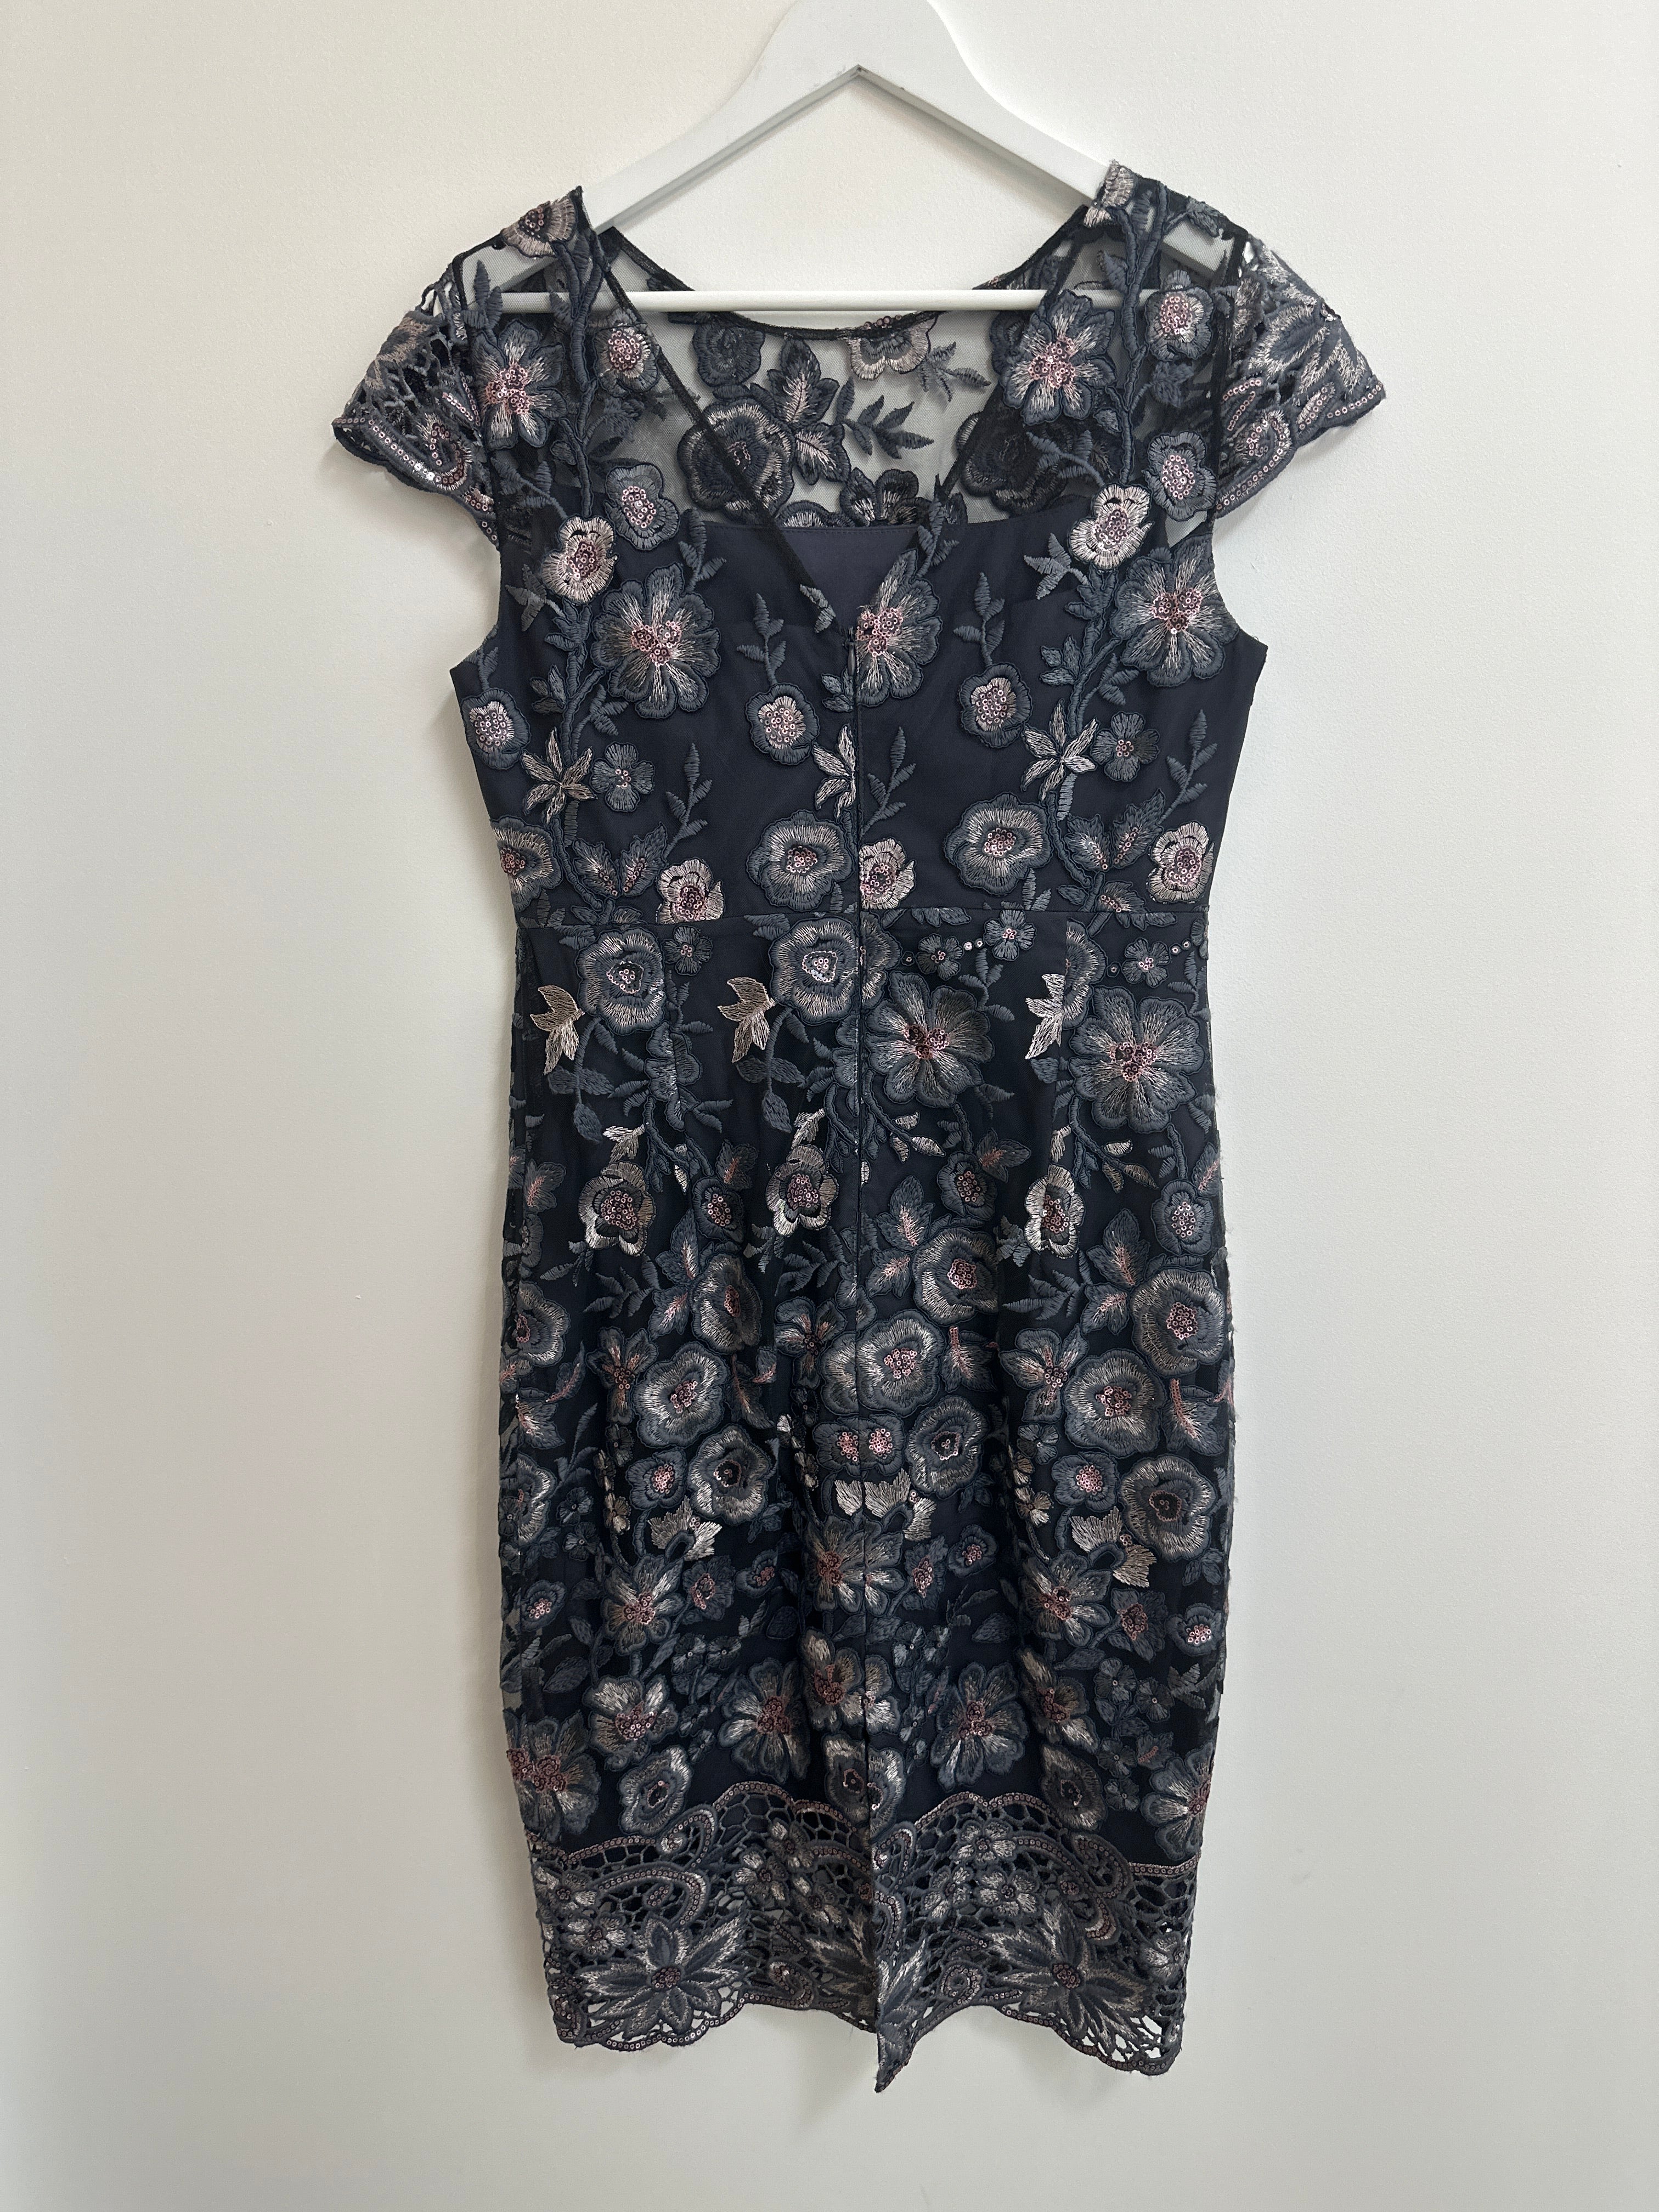 Buy Catherine Floral Embroidered Dress - Anthea Crawford | RELOOP